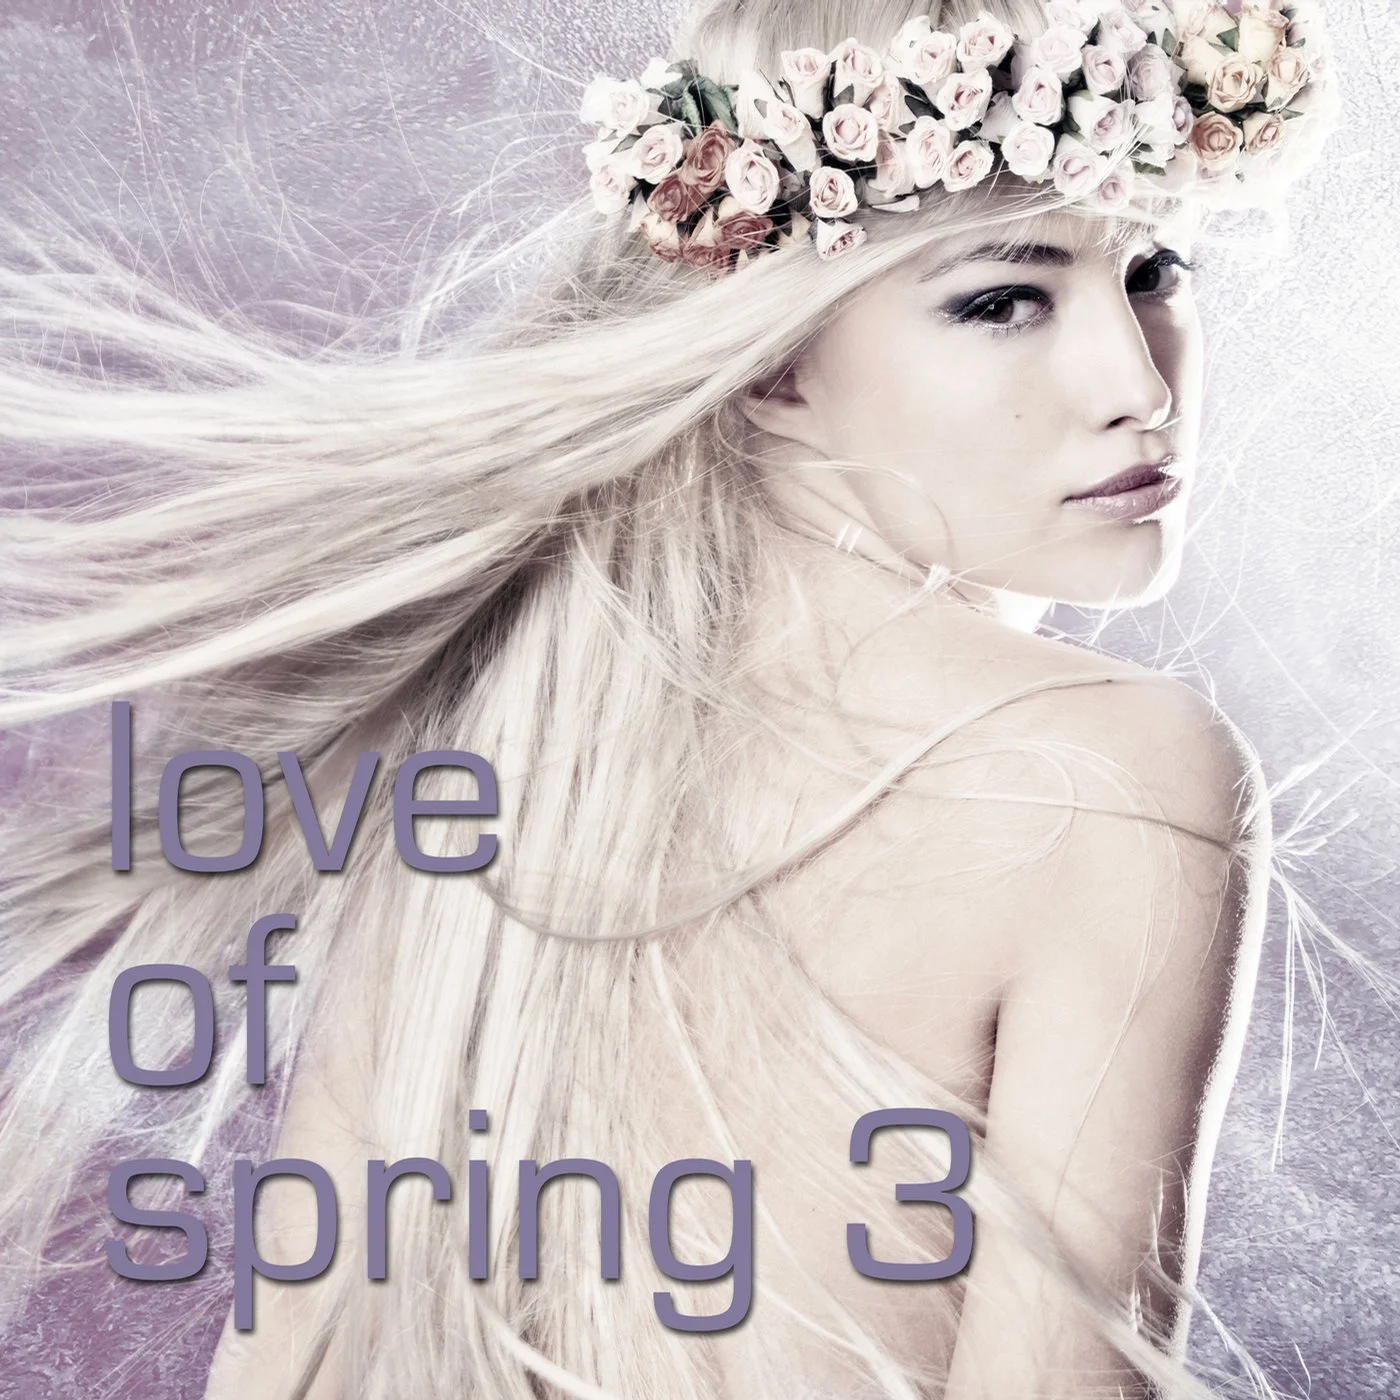 Cover von Compilation "Love of Spring 3"